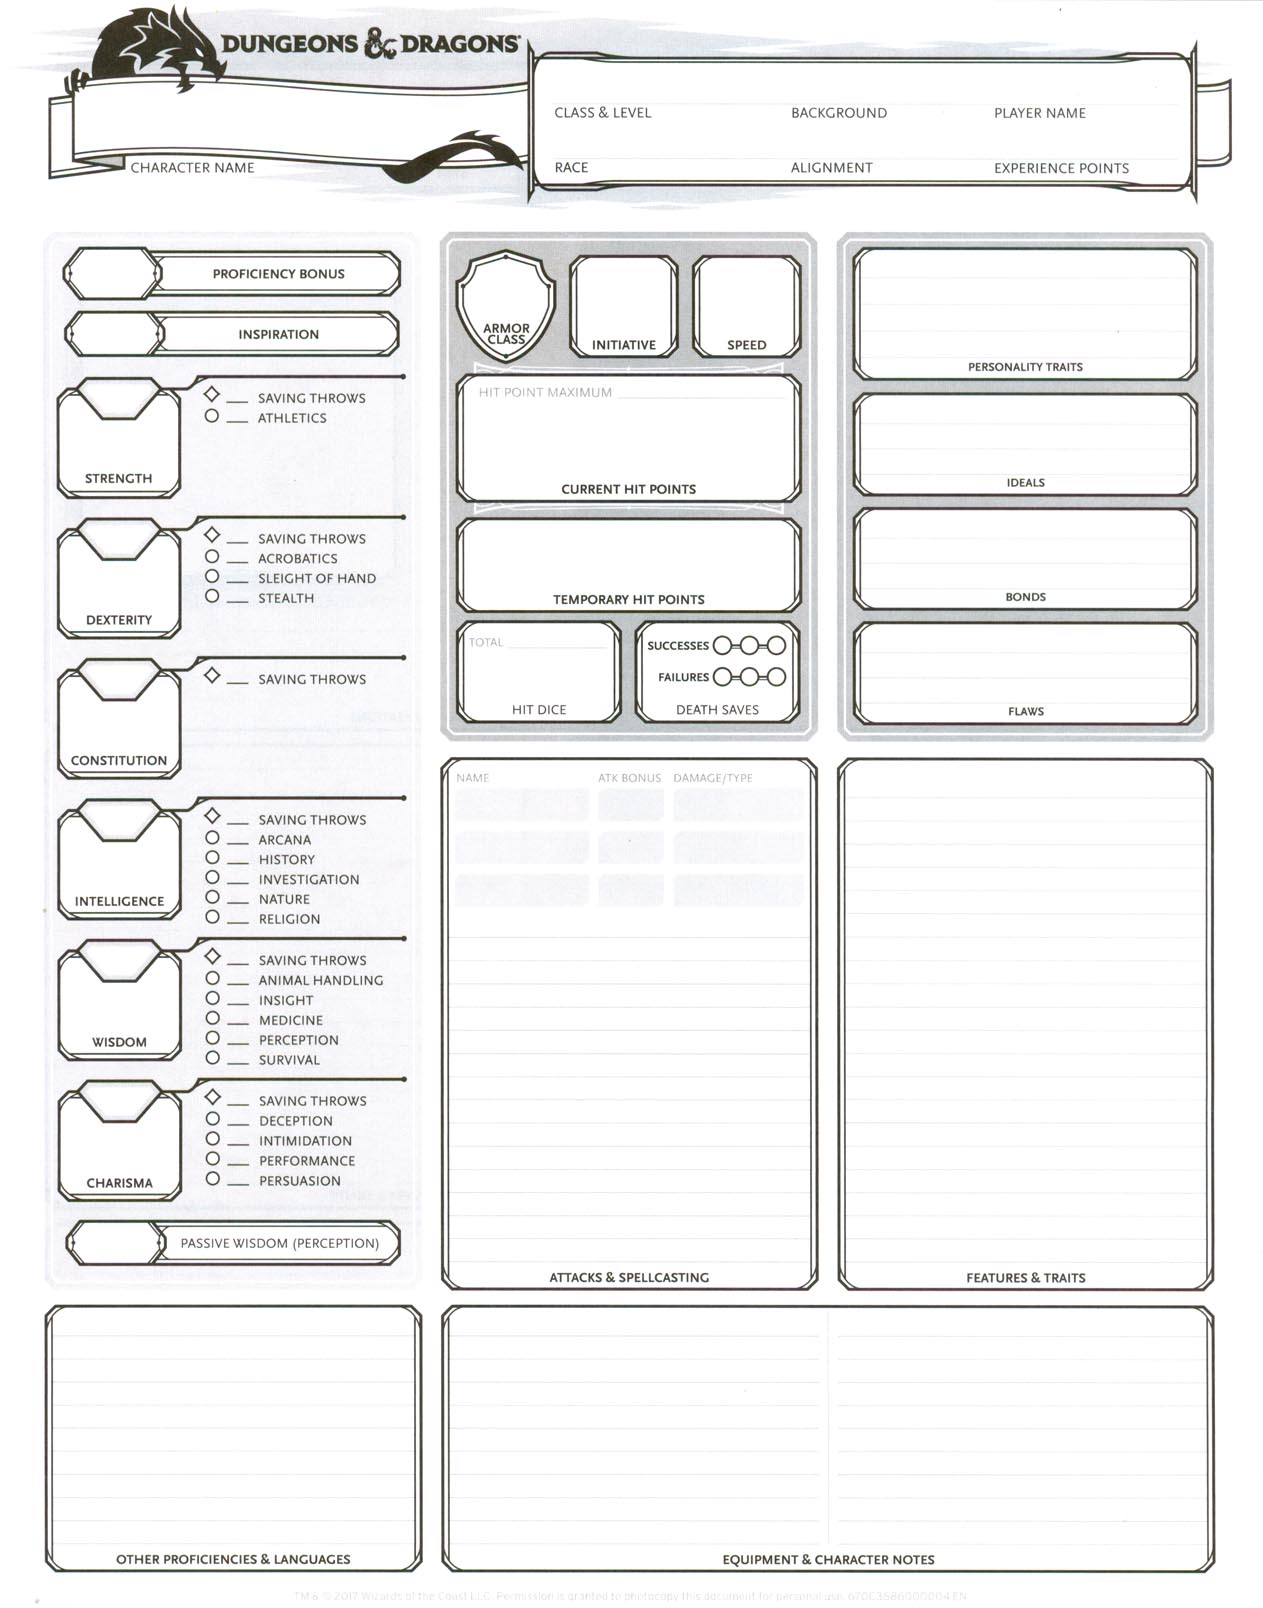 Character Sheet,5th Edition Dungeons And Dragons Archive,Dnd 5e Character S...